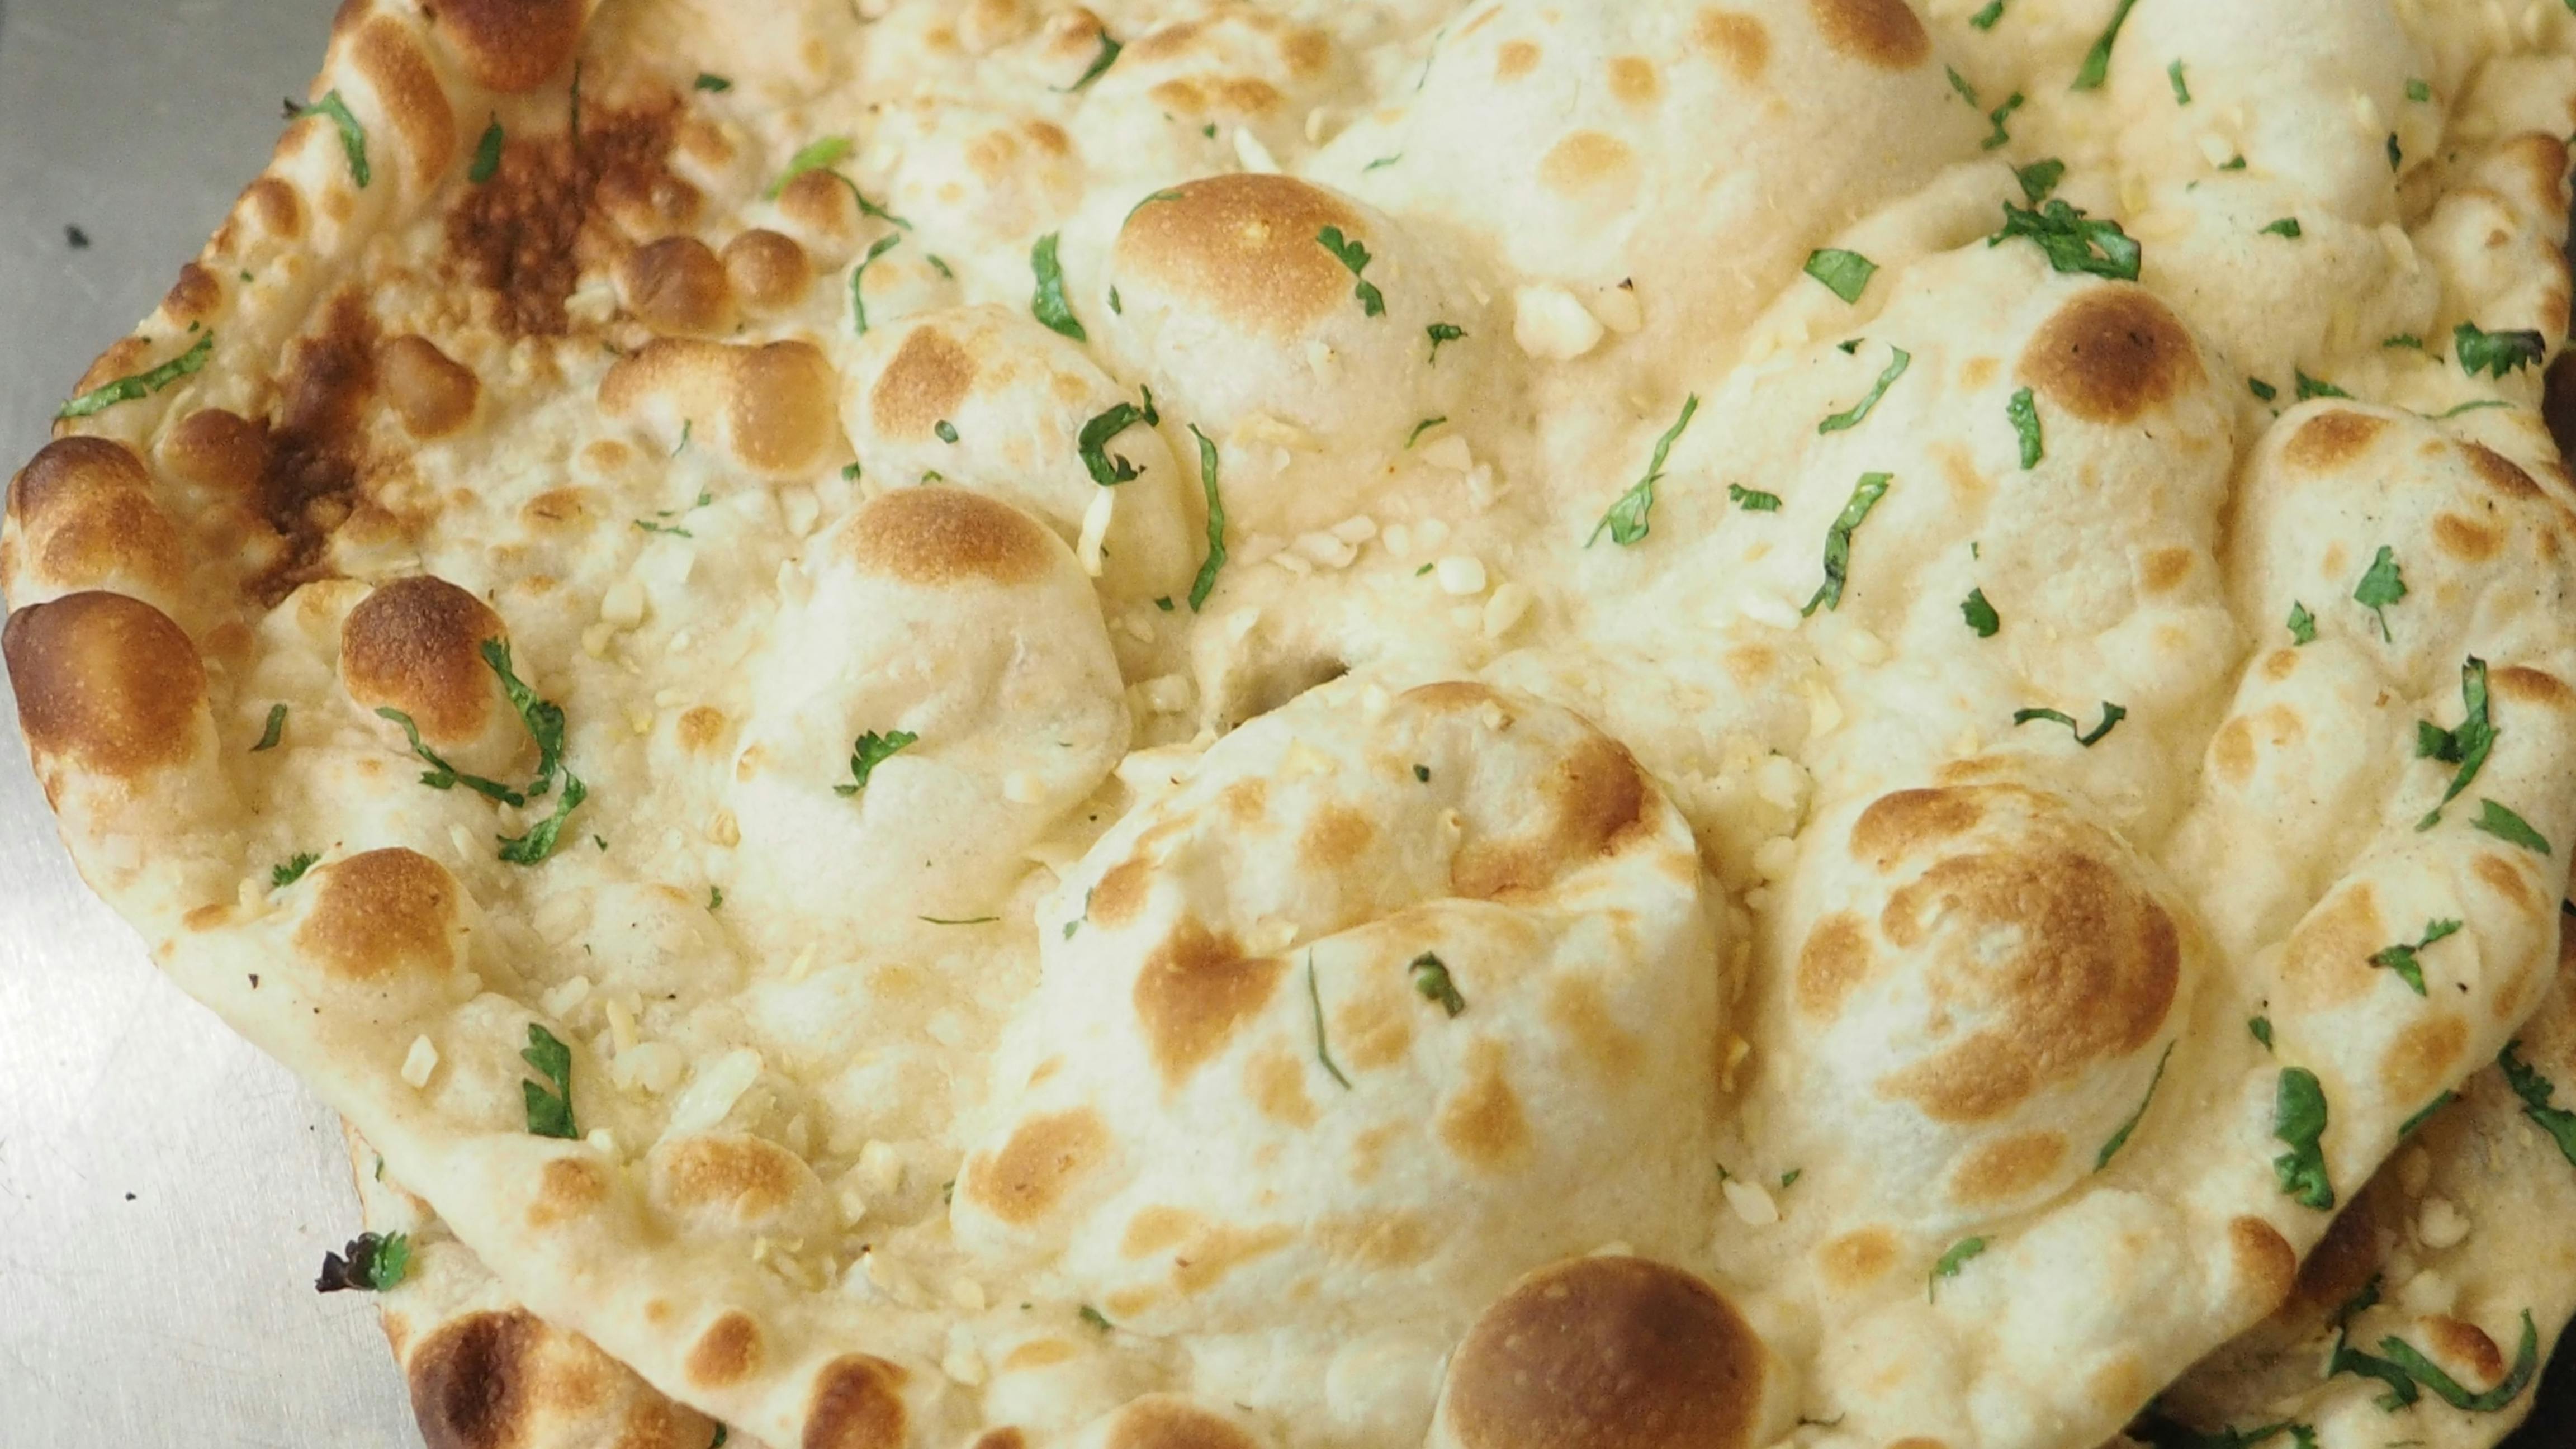 Free stock photo of naan bread